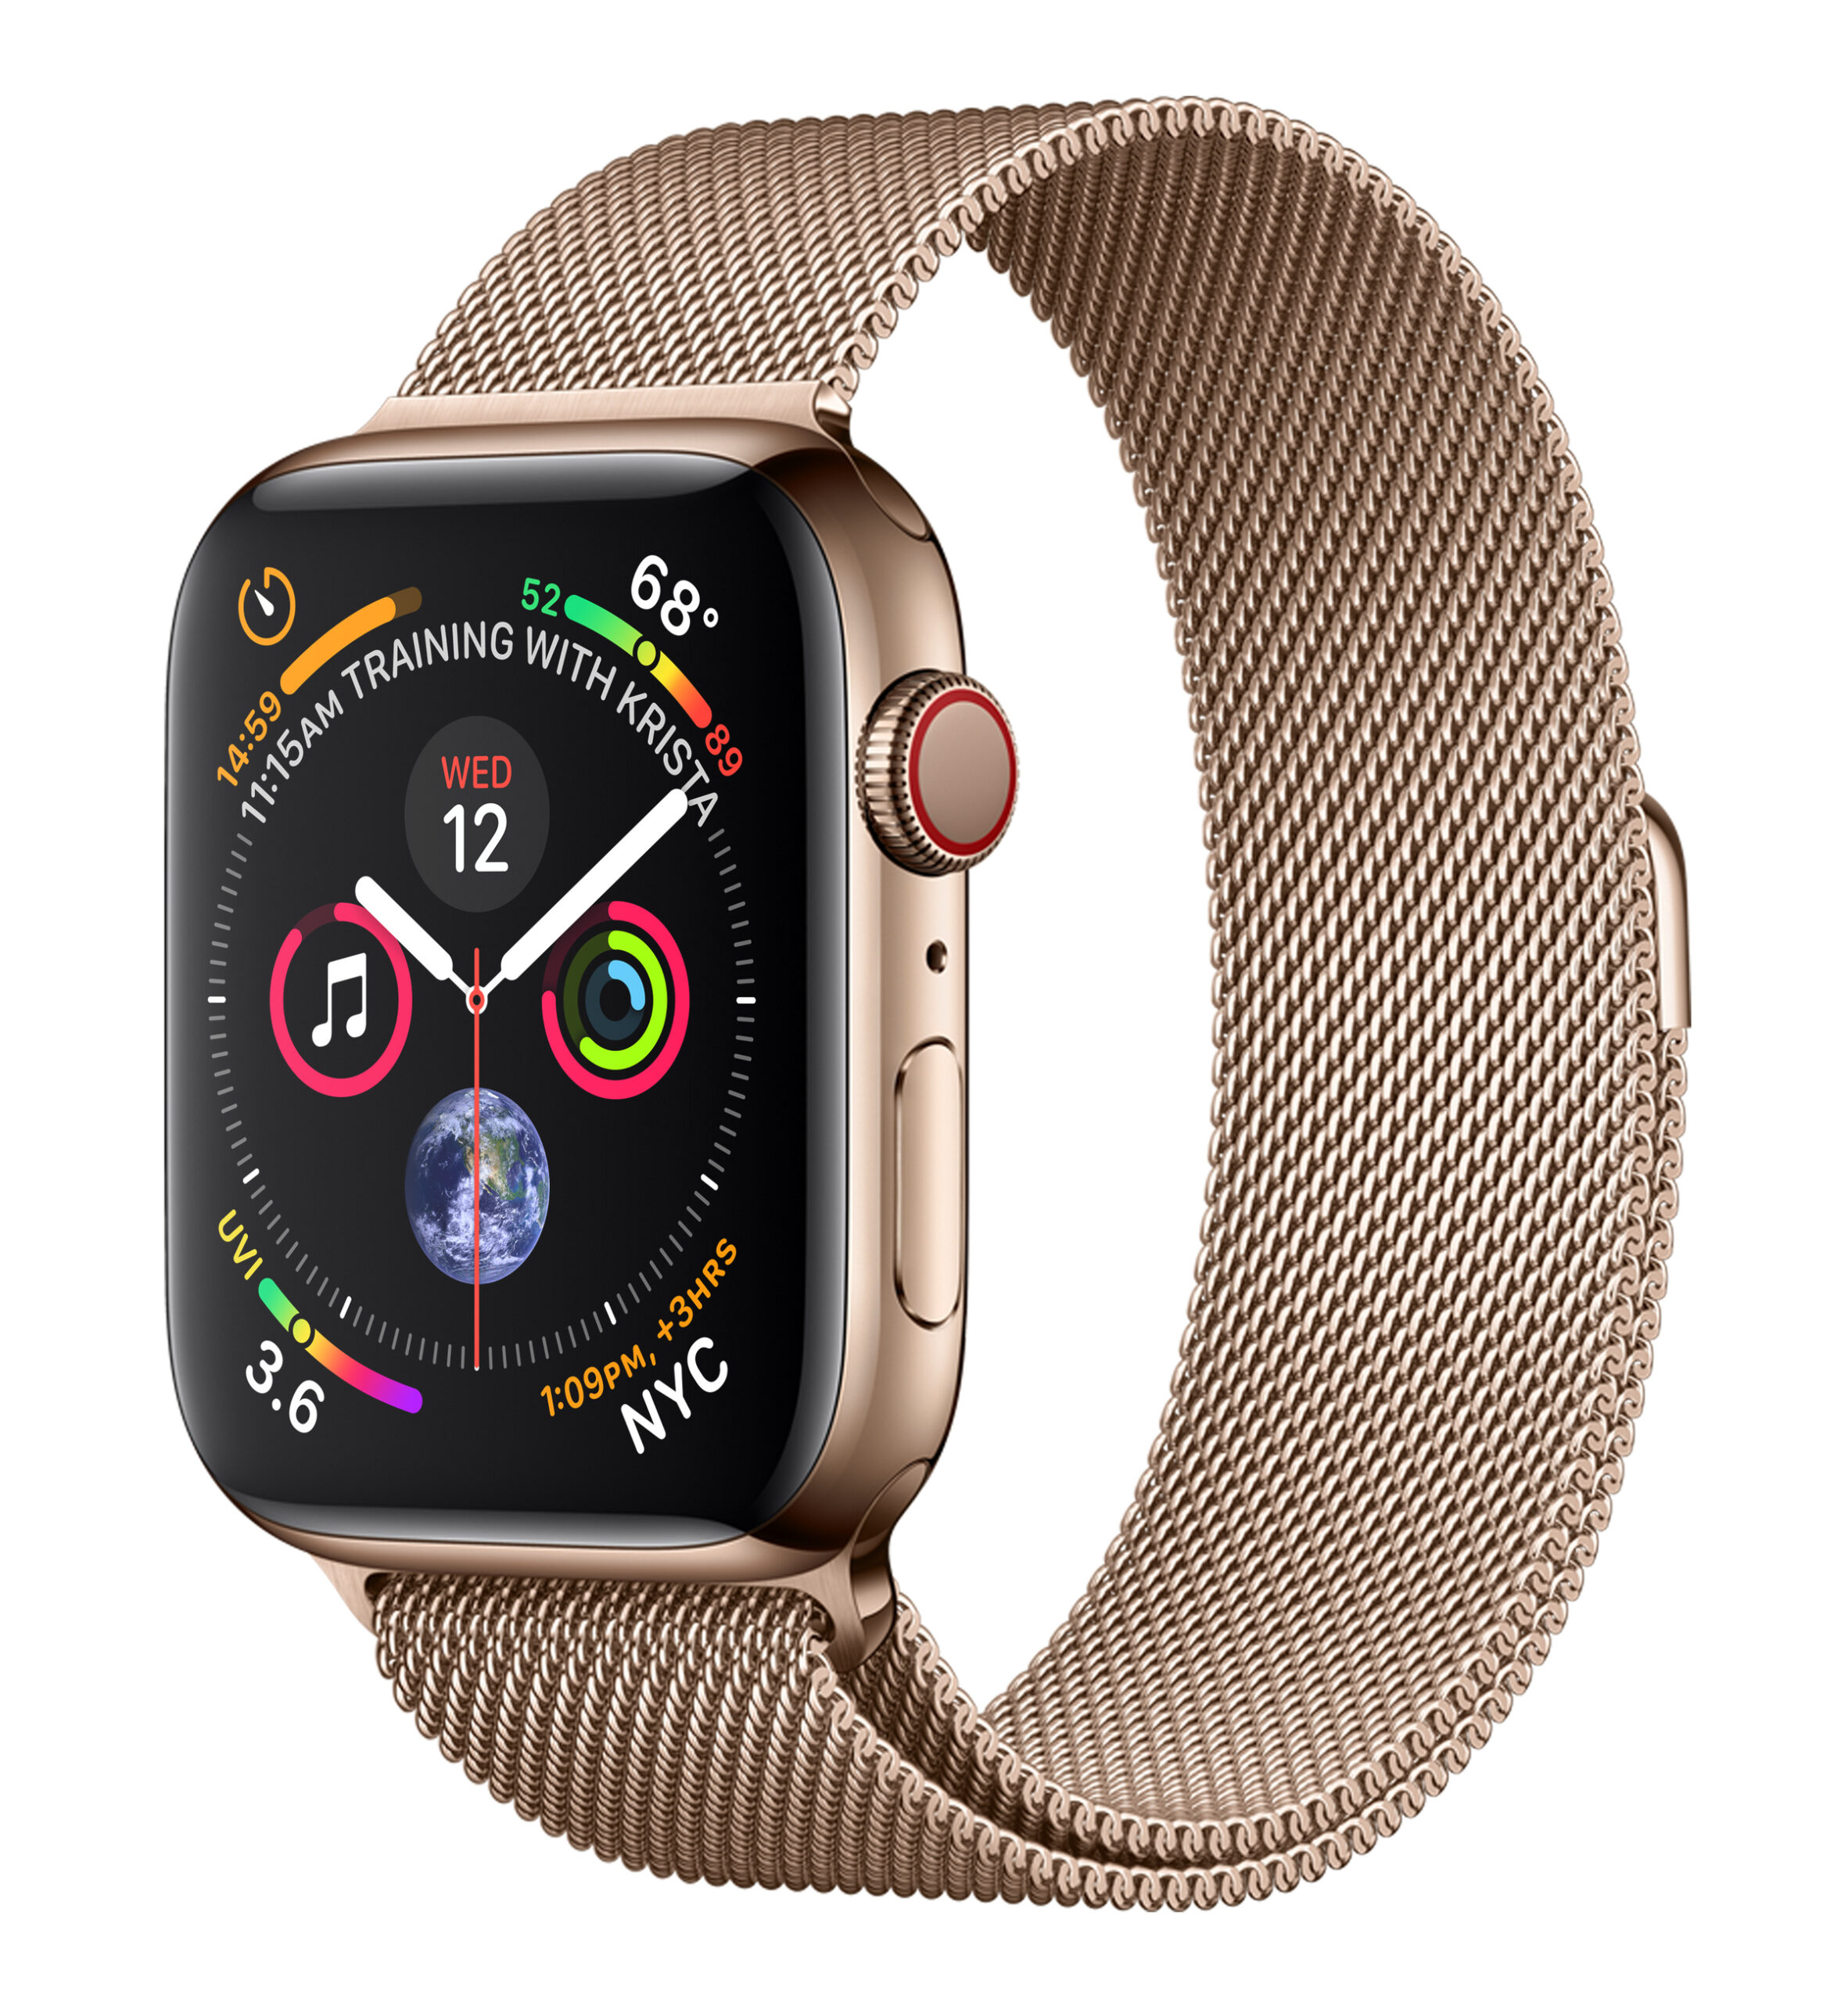 MTV82LL/A | $344 | Apple Watch Series 4 (GPS + Cellular, 44mm, Gold Apple Watch Stainless Steel Series 4